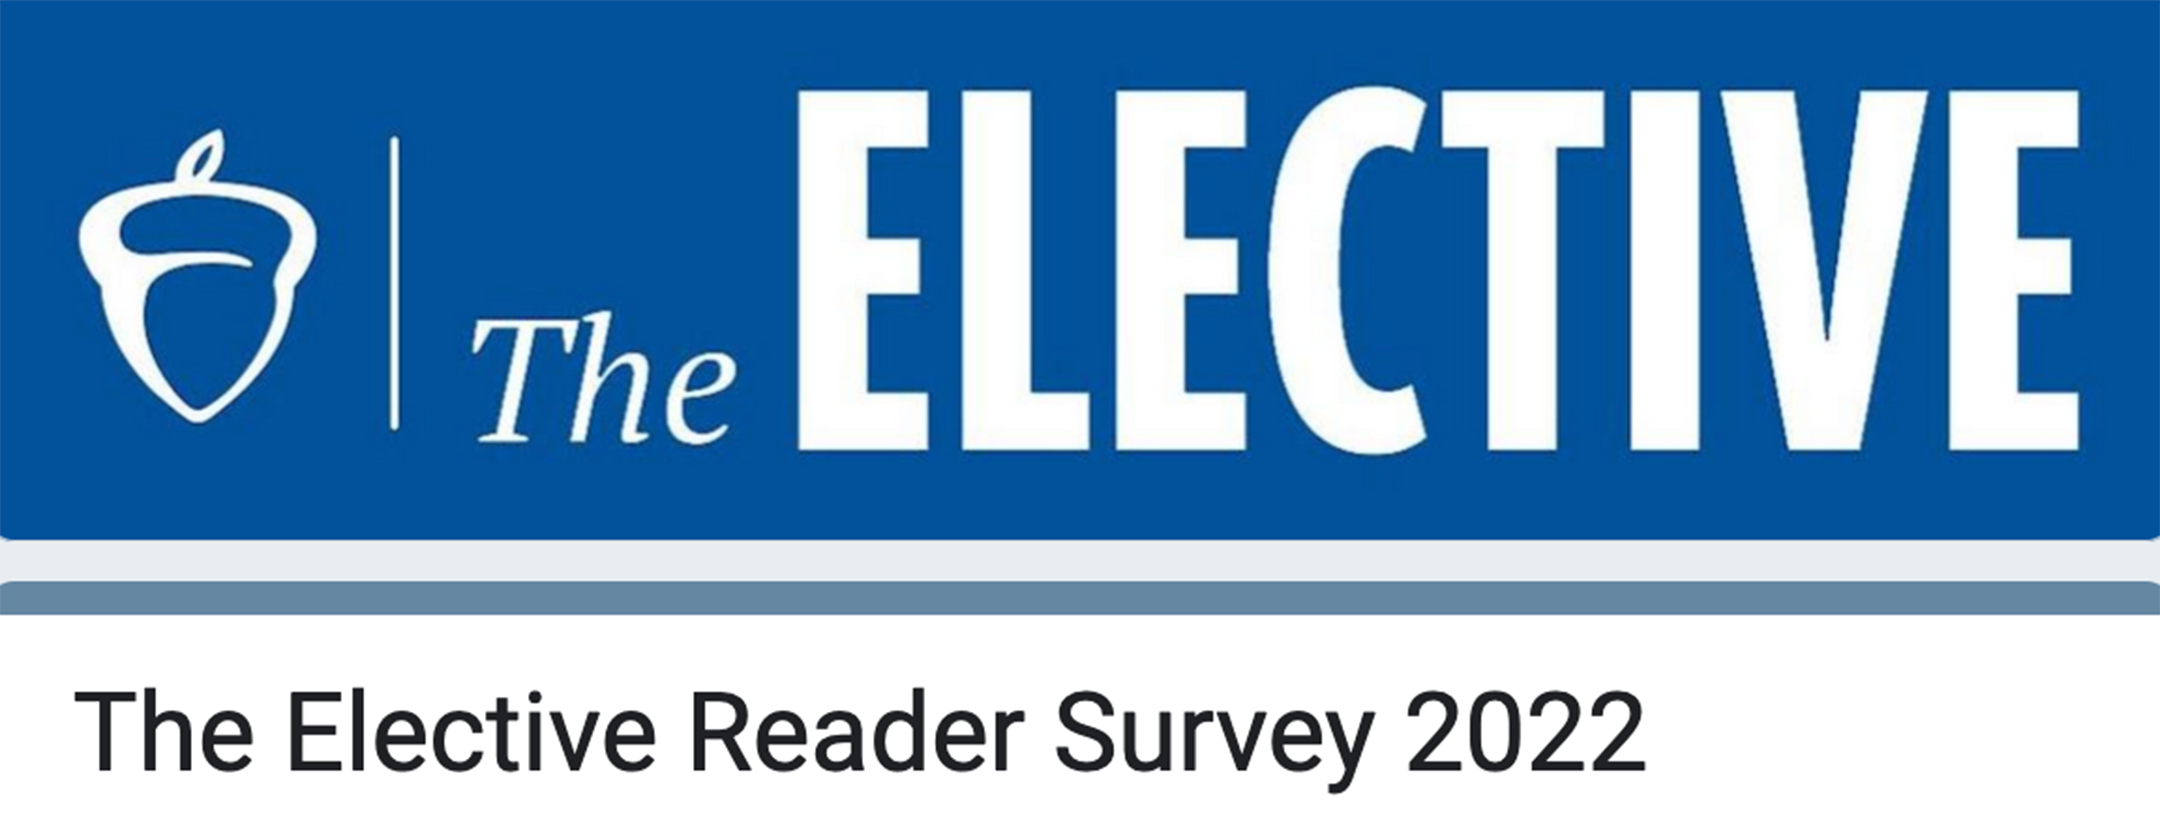 image with the words The Elective in white on a blue background to the right of a white acorn on the top, and the words The Elective Reader Survey 2022 on the bottom